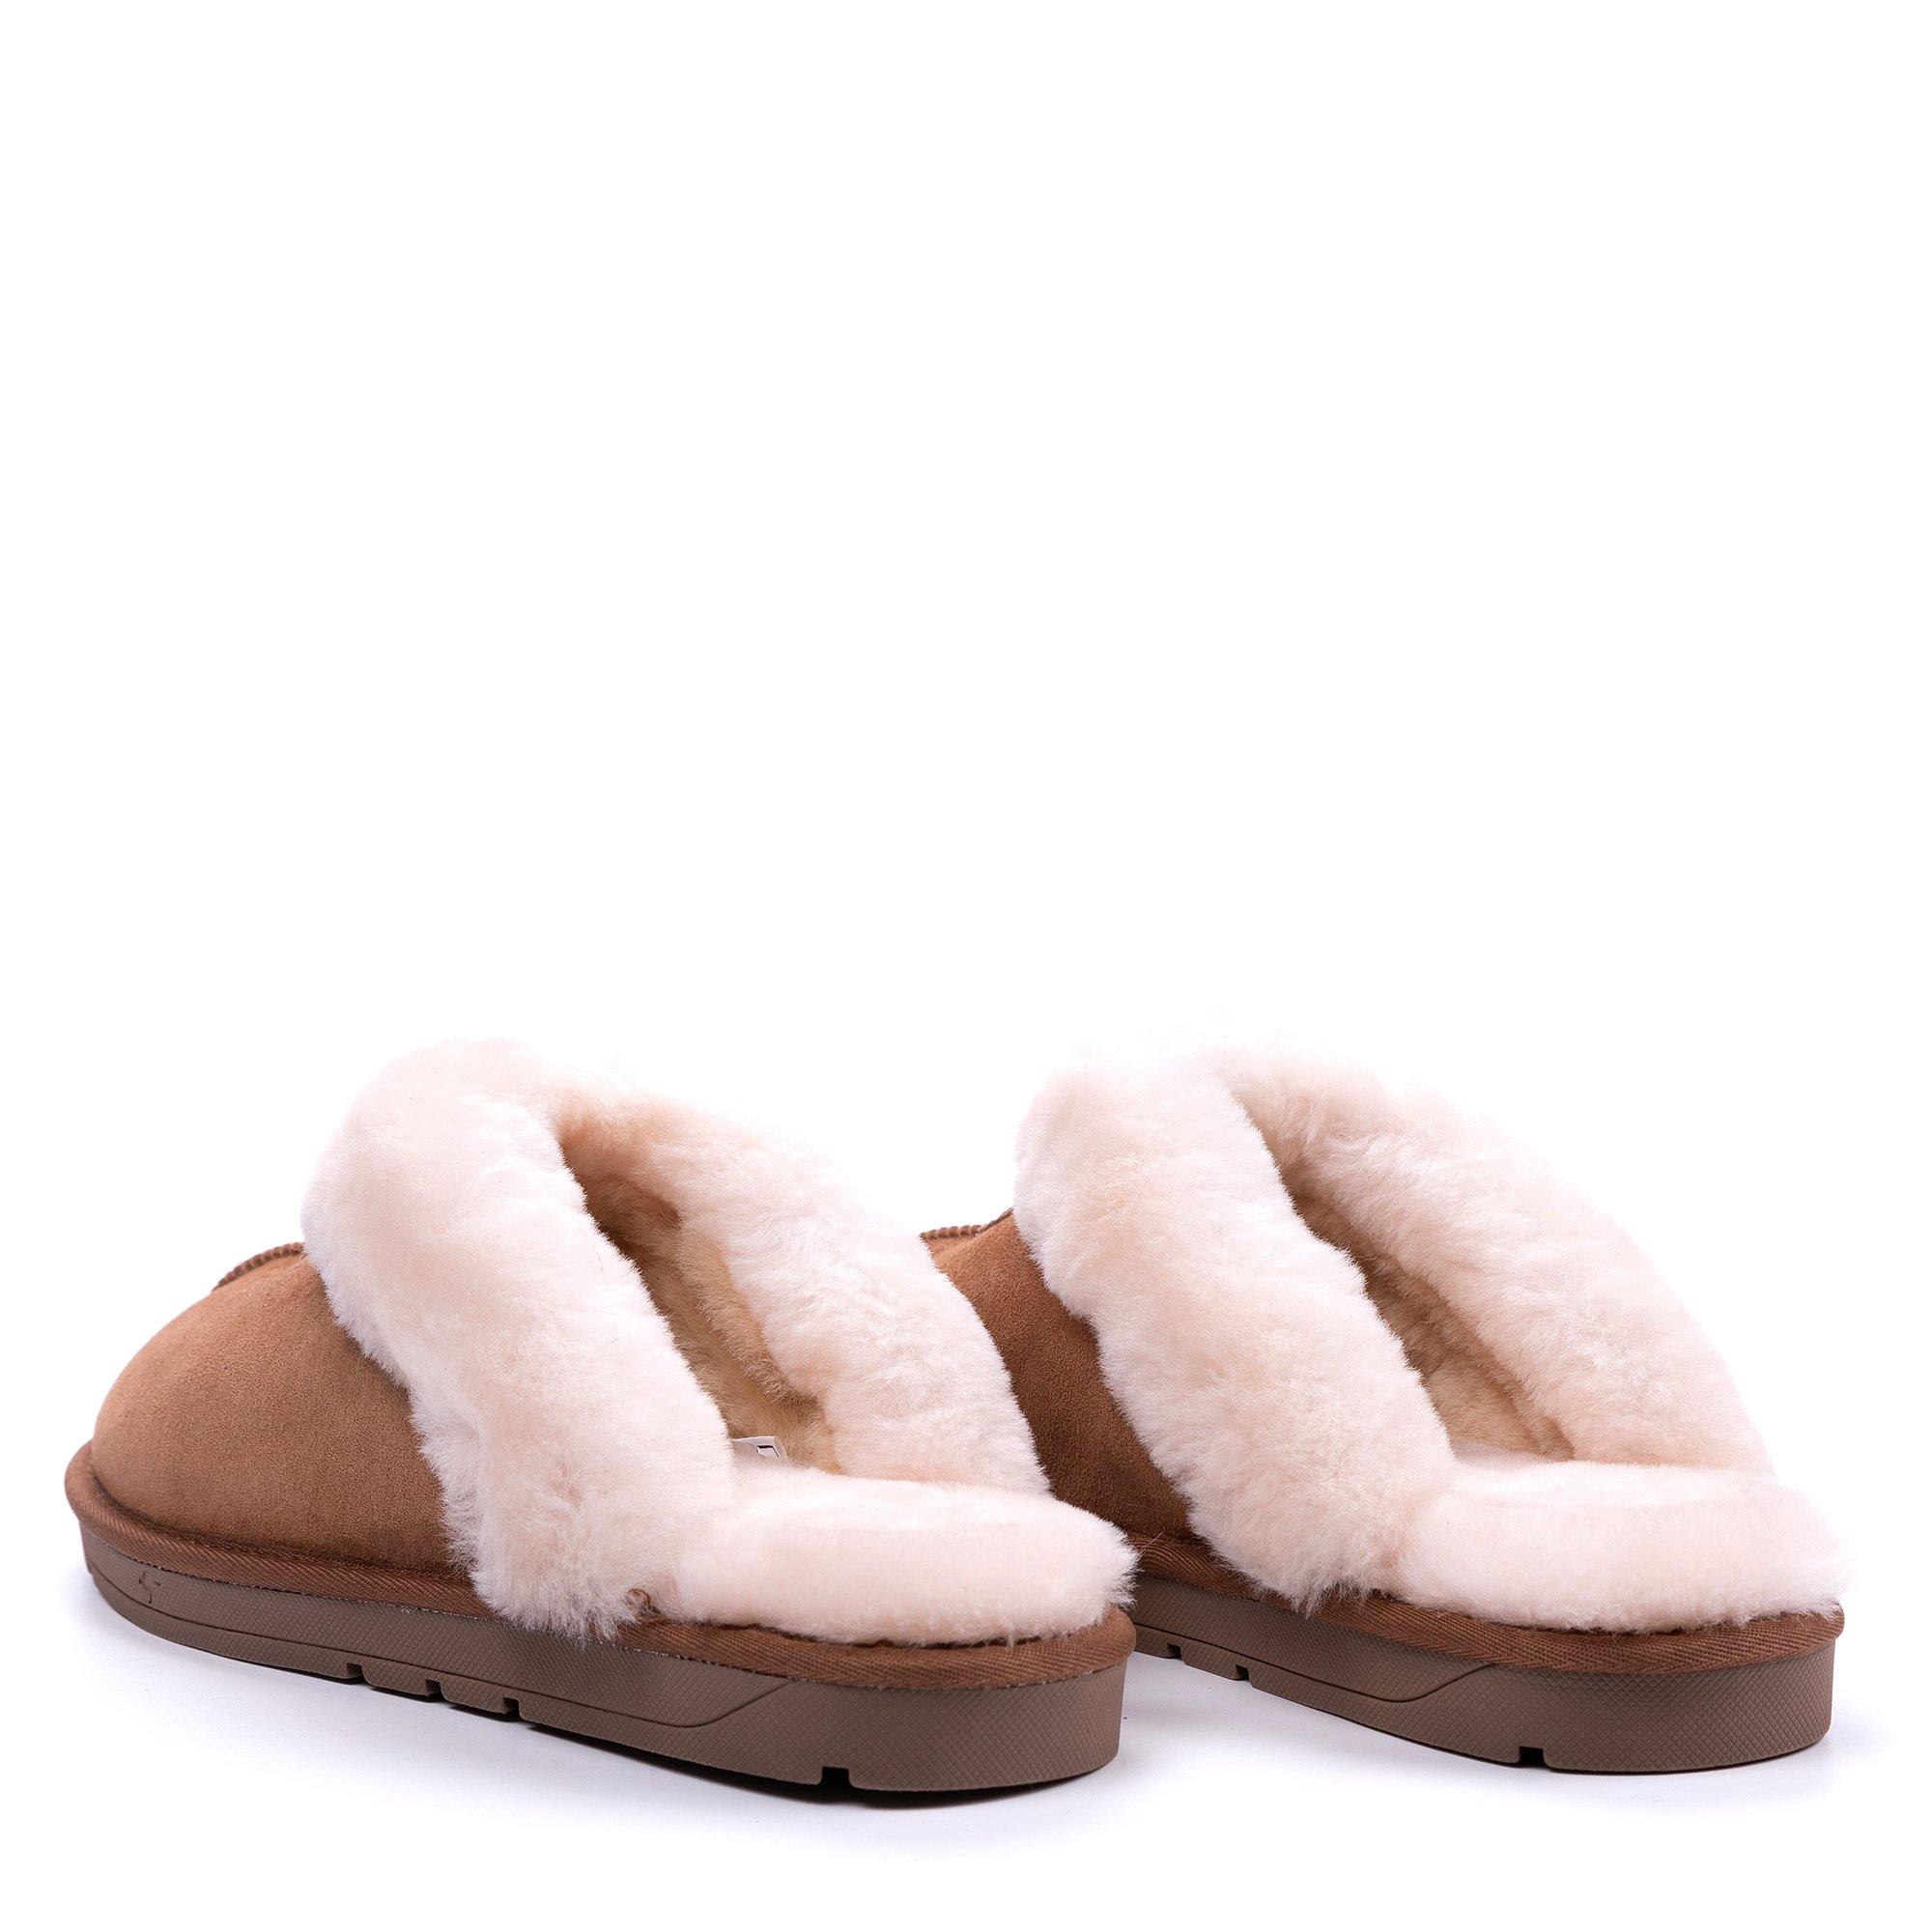 UGG Roozee Scuff Slippers